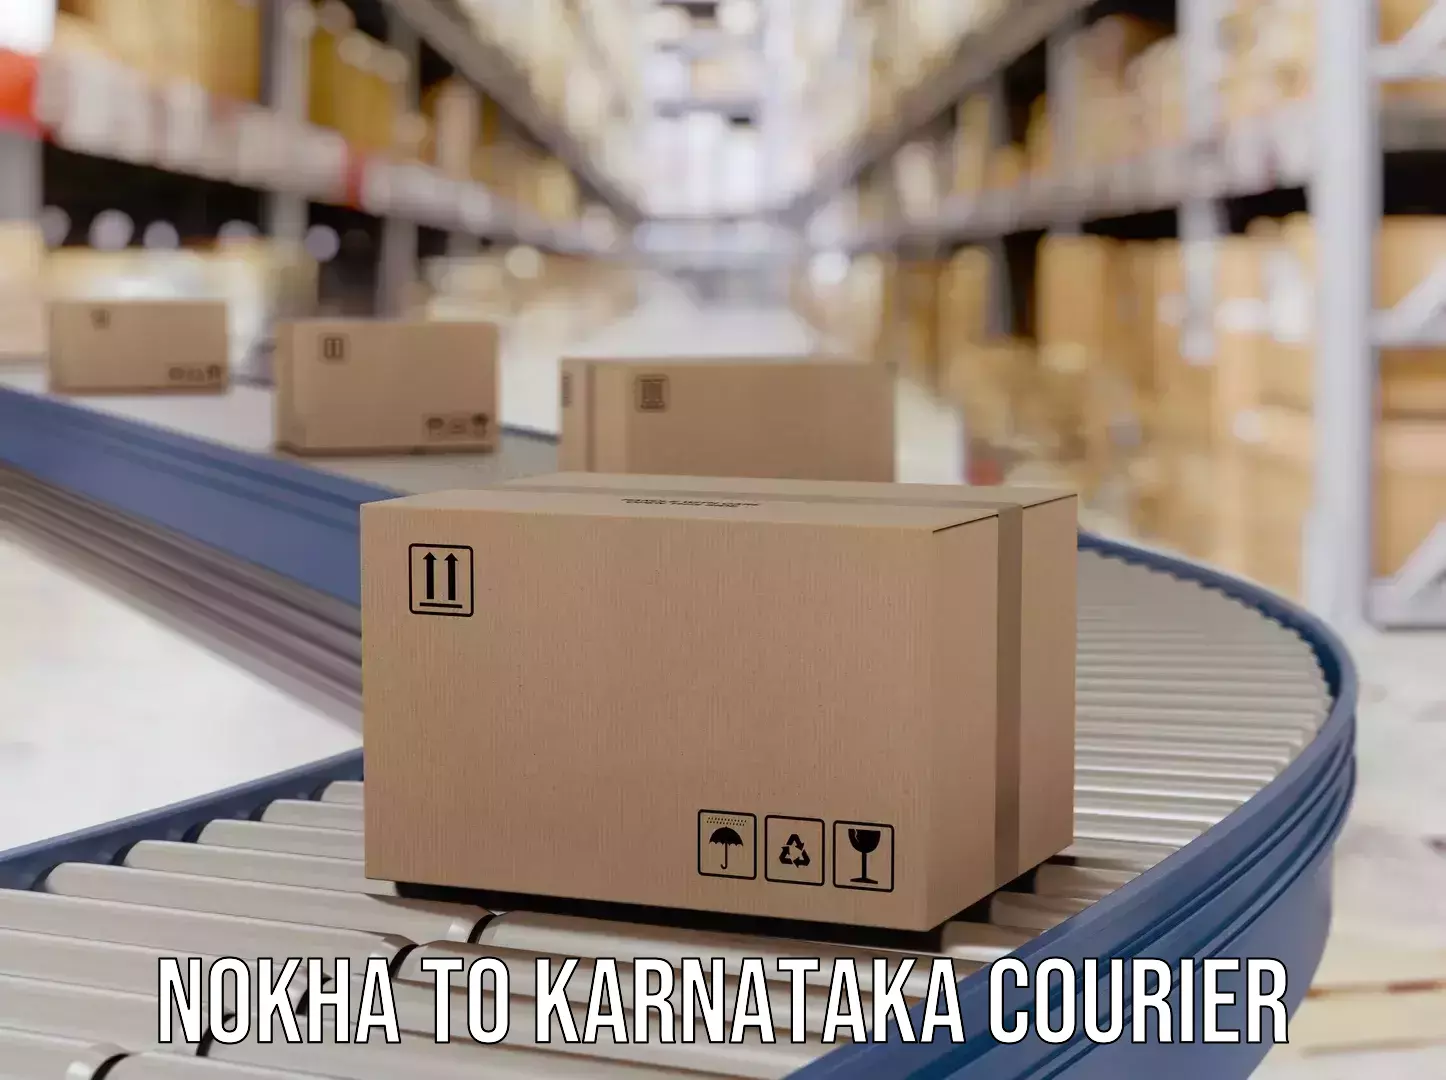 Online package tracking Nokha to Channapatna